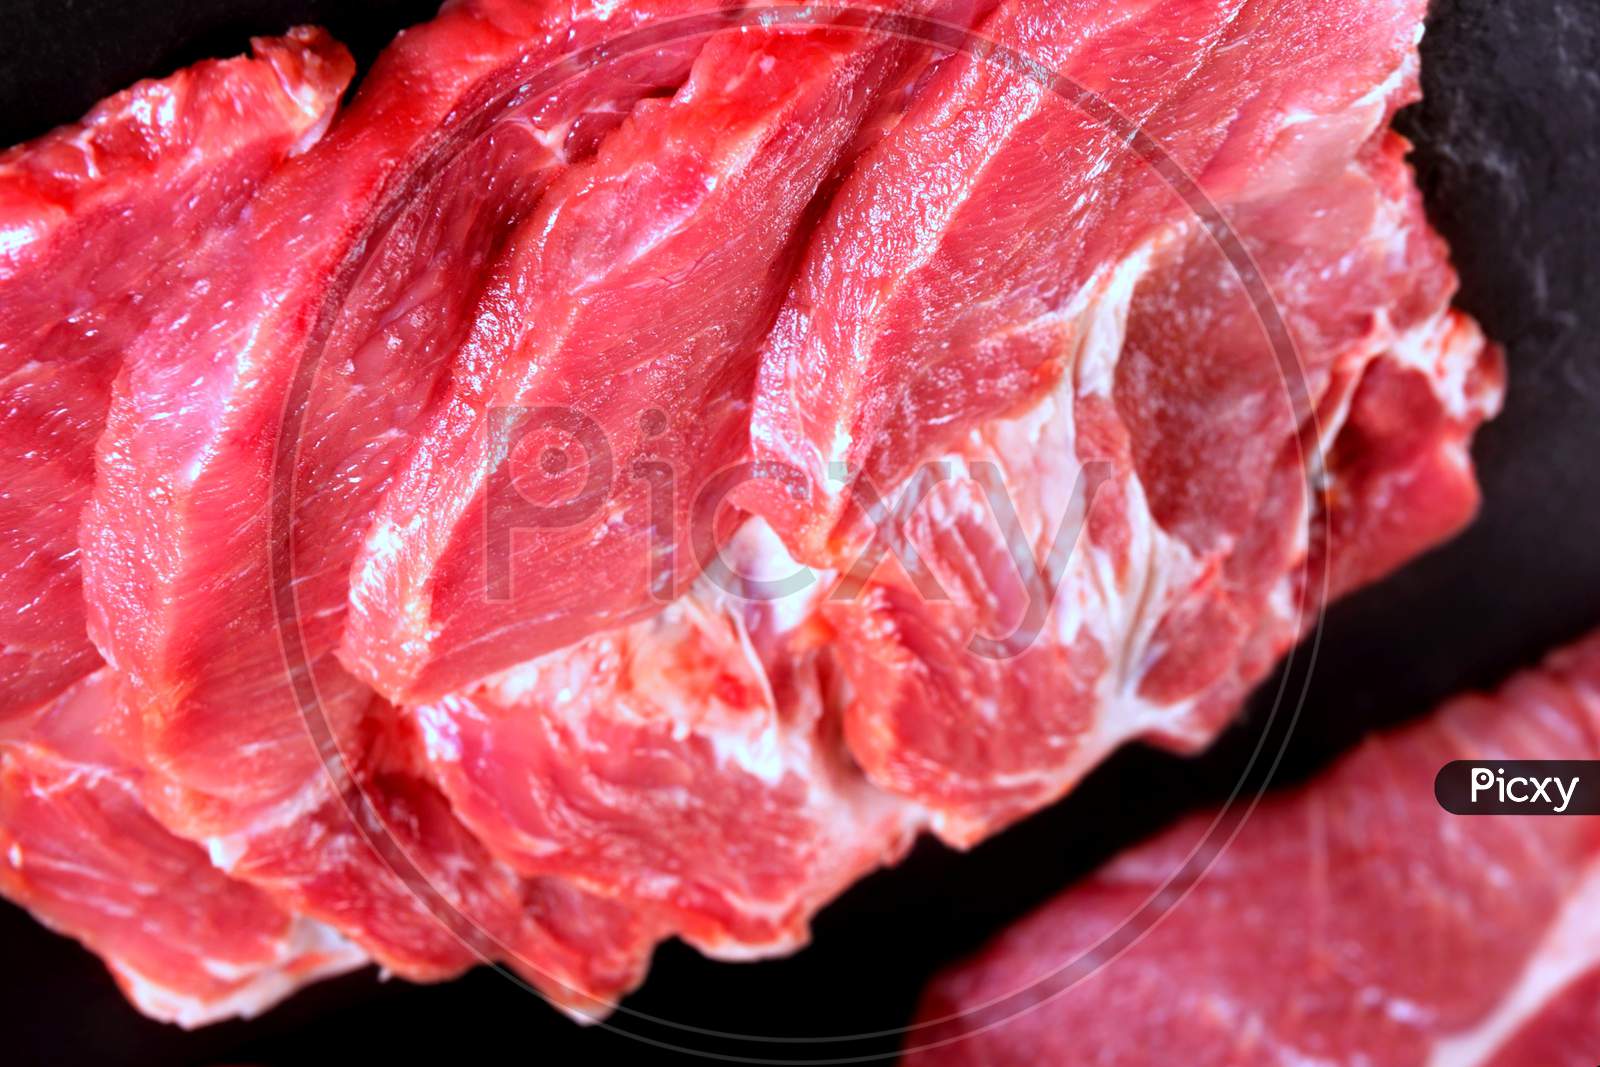 A Picture Of Beautiful View Of Red Meat